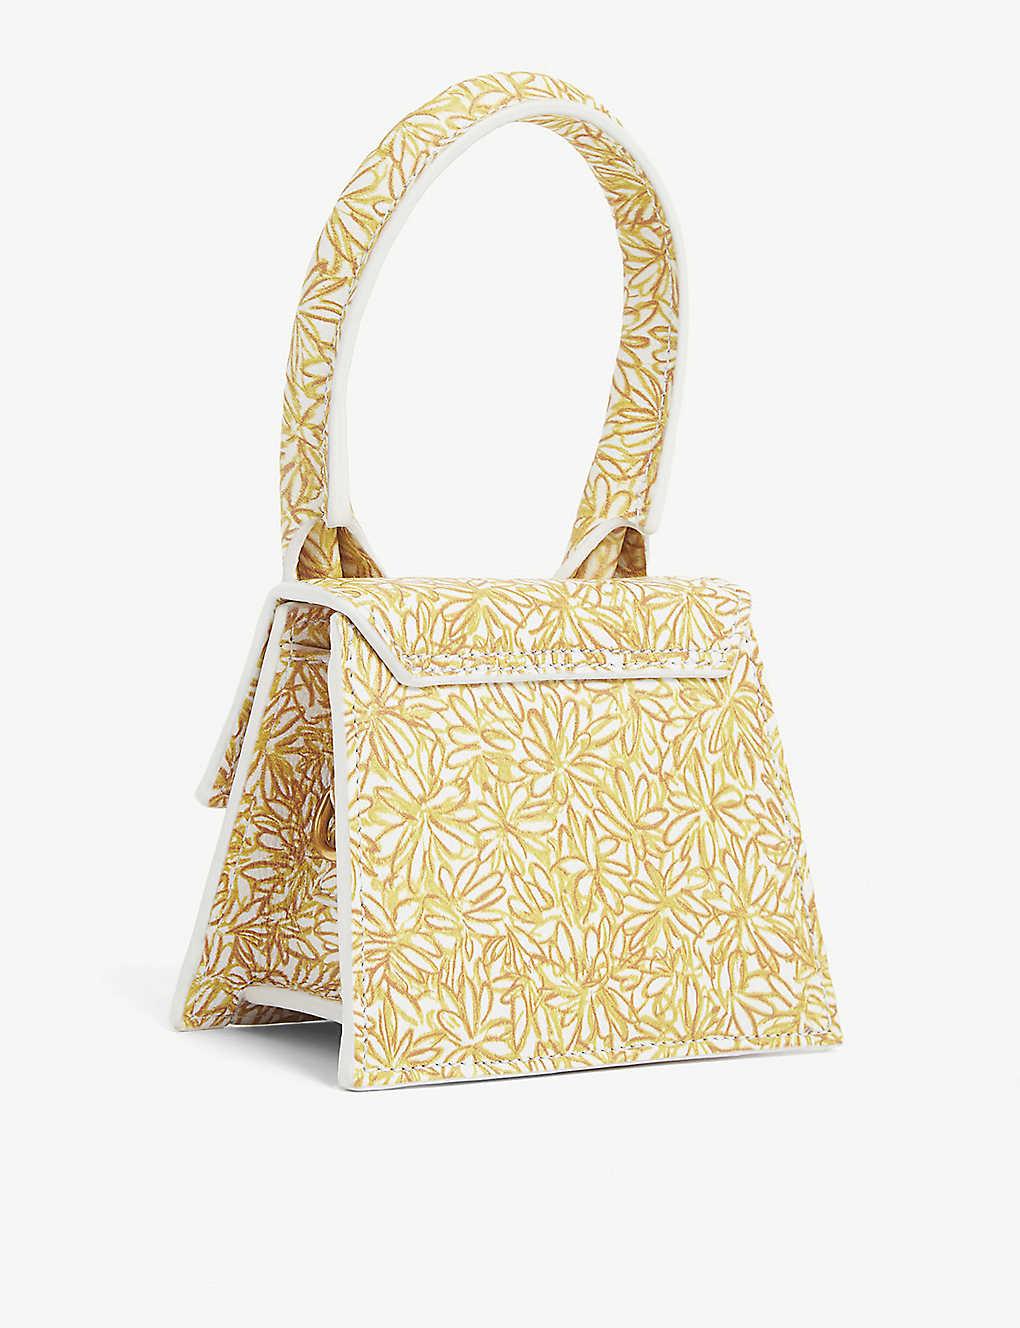 Jacquemus Le Chiquito Mini Leather Top Handle Bag in Print Orange Flowers  (Yellow) | Lyst